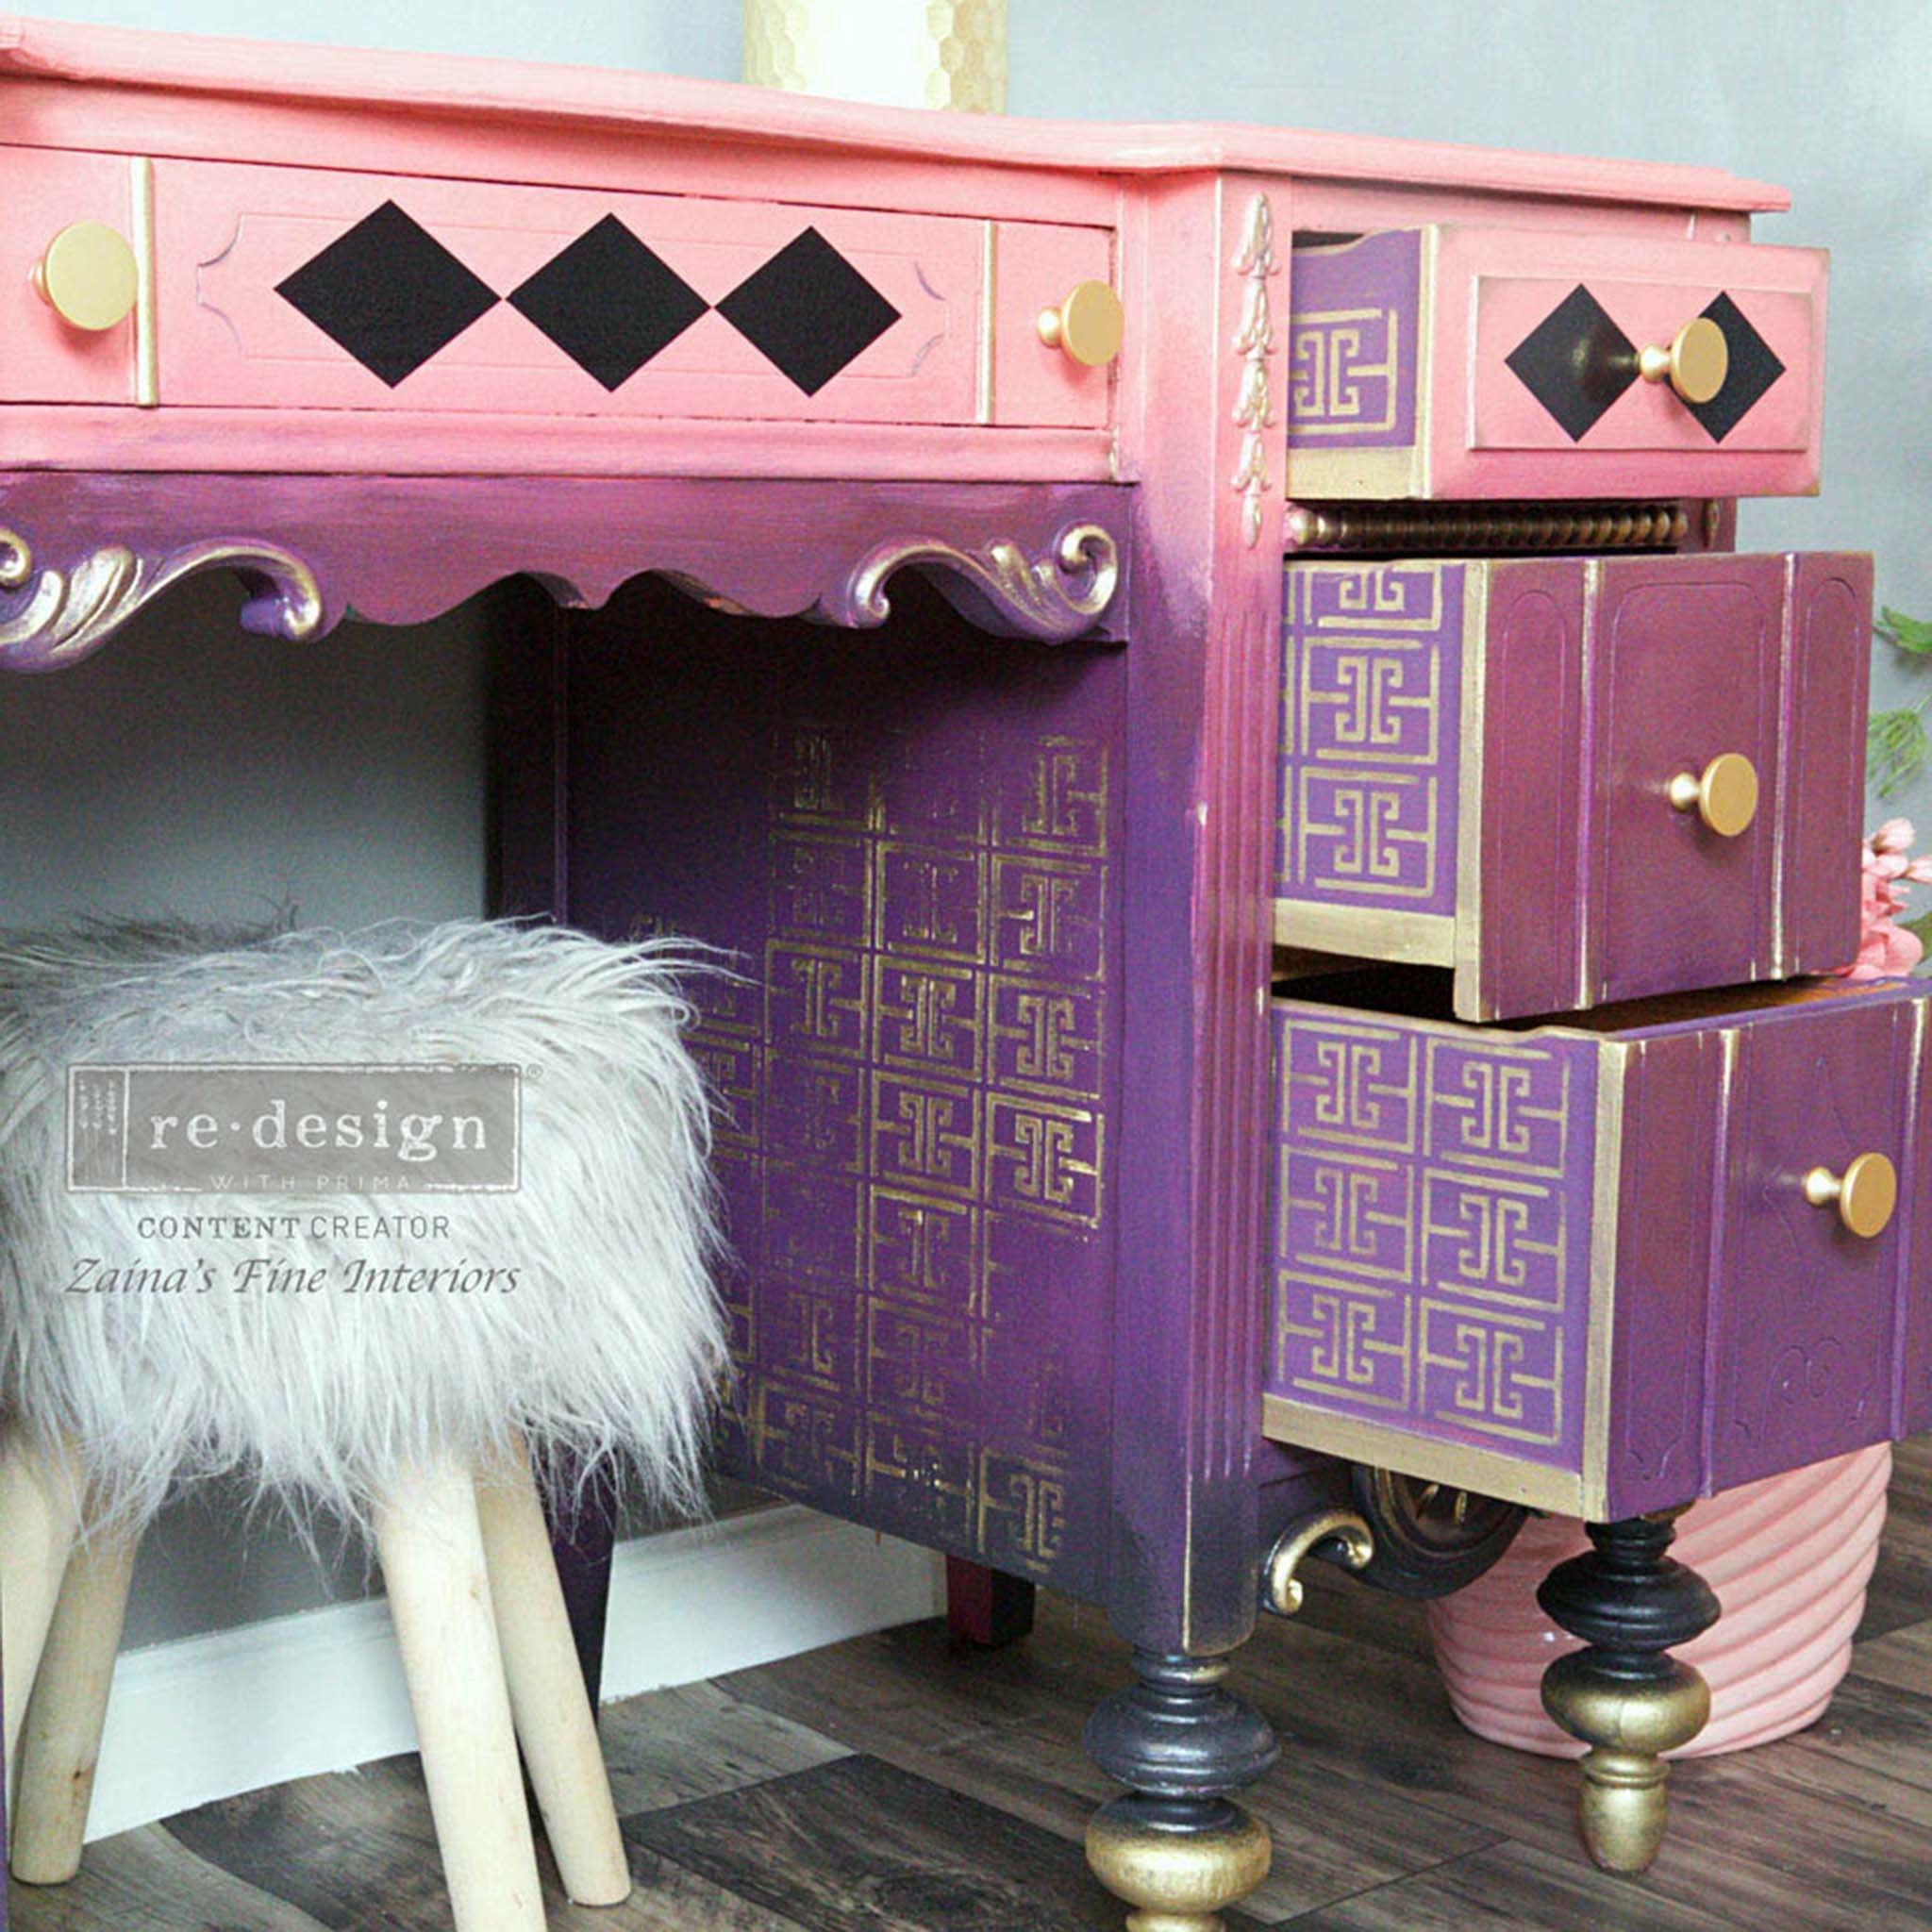 Pink and purple ombre dresser with the Something Geometric stencil on top. A Redesign Zainas Fine Interiors logo on the left.